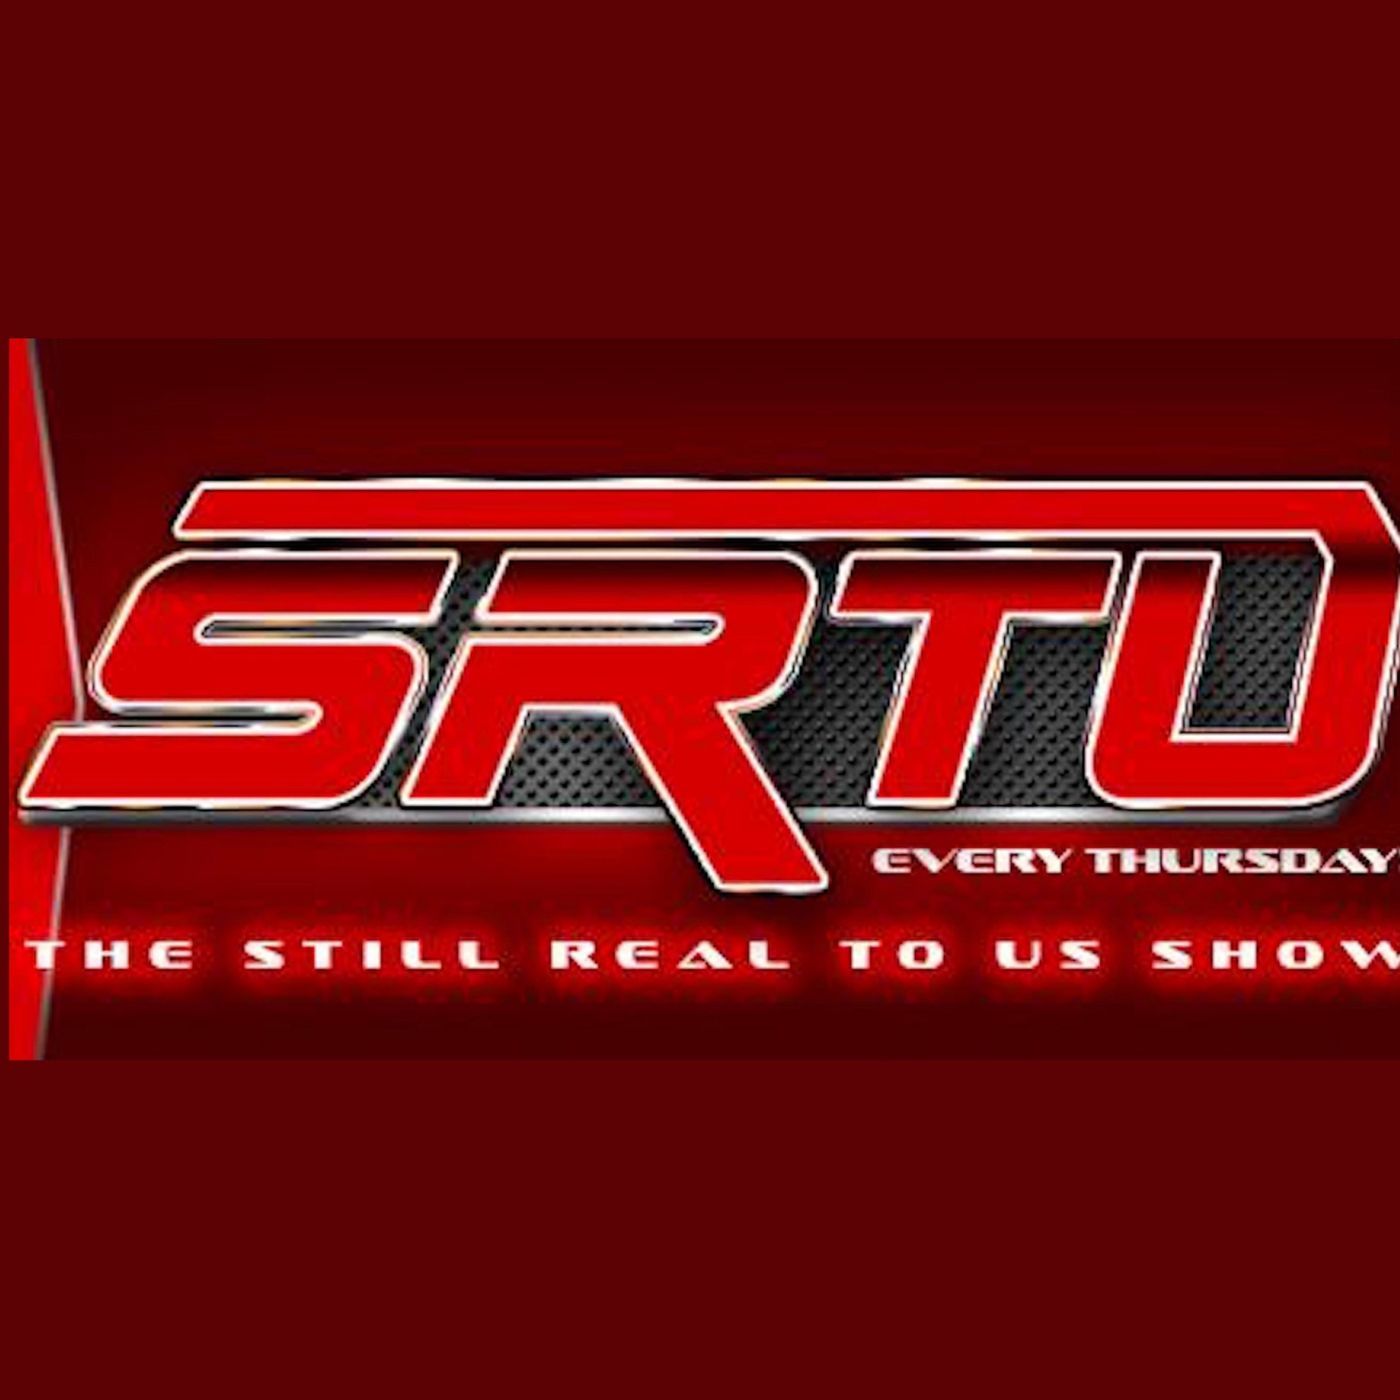 The Still Real to Us Show: Episode #606 – 9/23/21